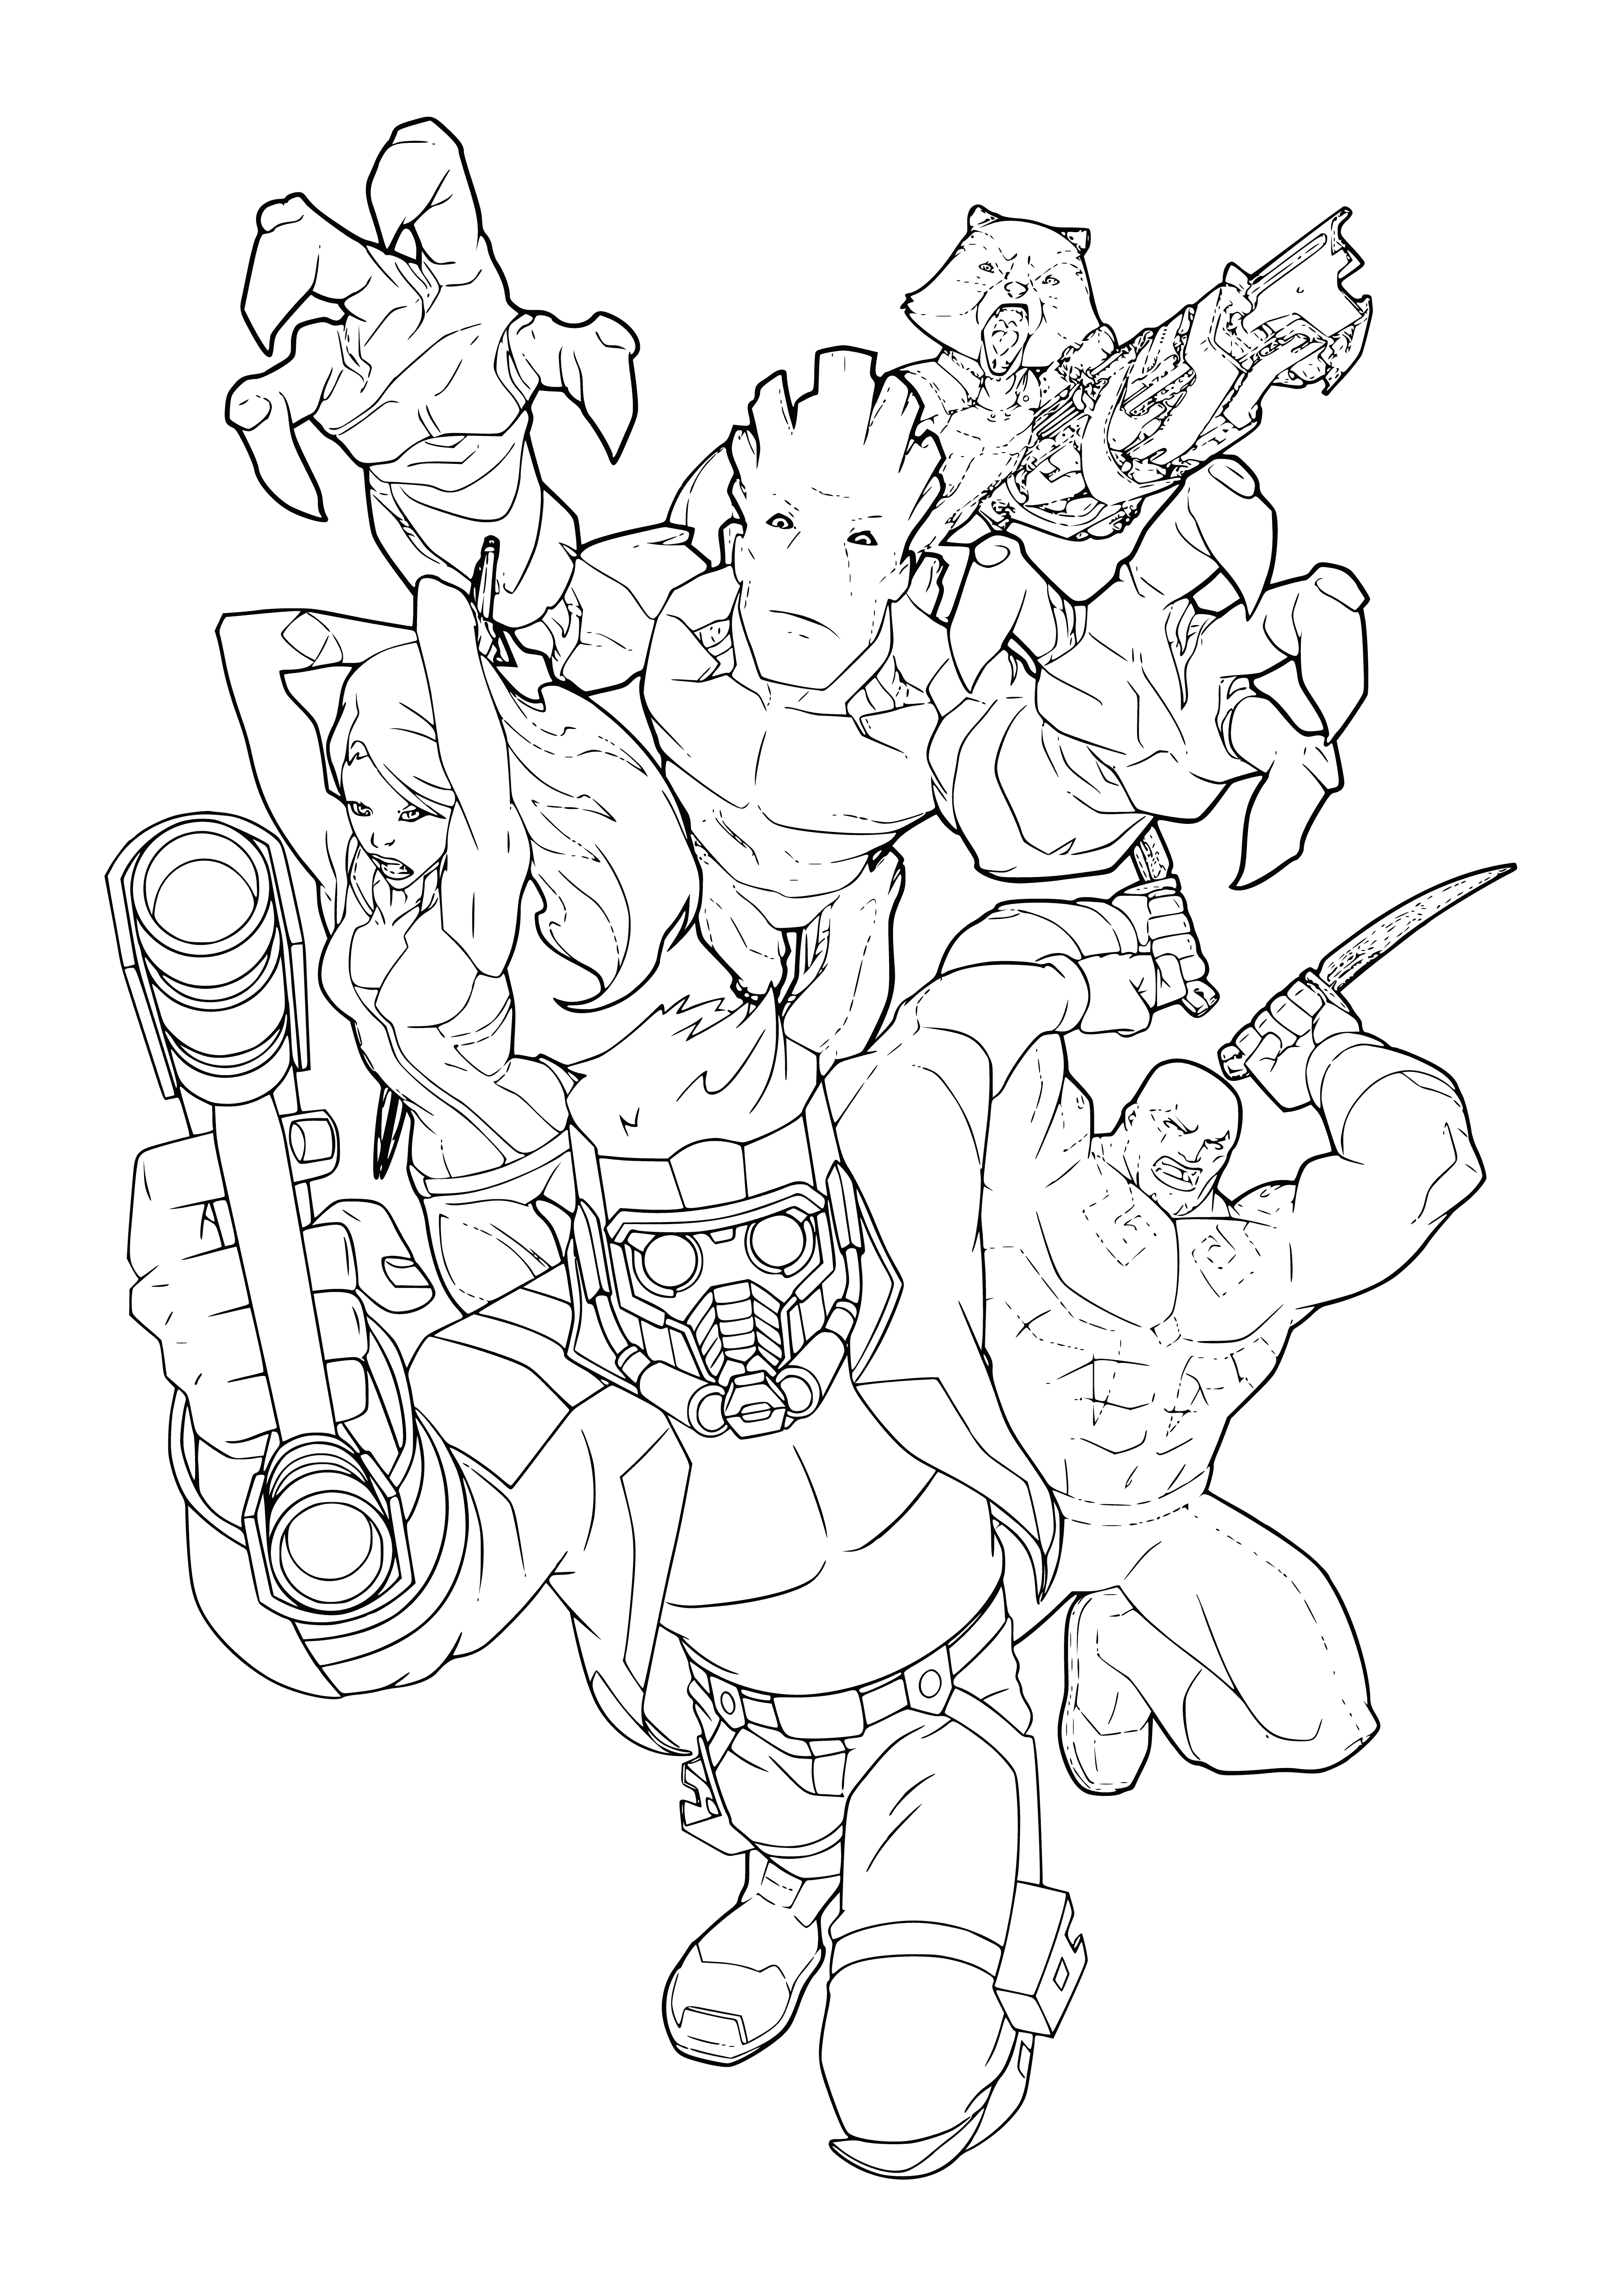 coloring page: Superhero team Guardians of the Galaxy comprised of Star-Lord, Gamora, Drax, Rocket, and Groot take it upon themselves to protect the universe and keep the peace. #Marvel